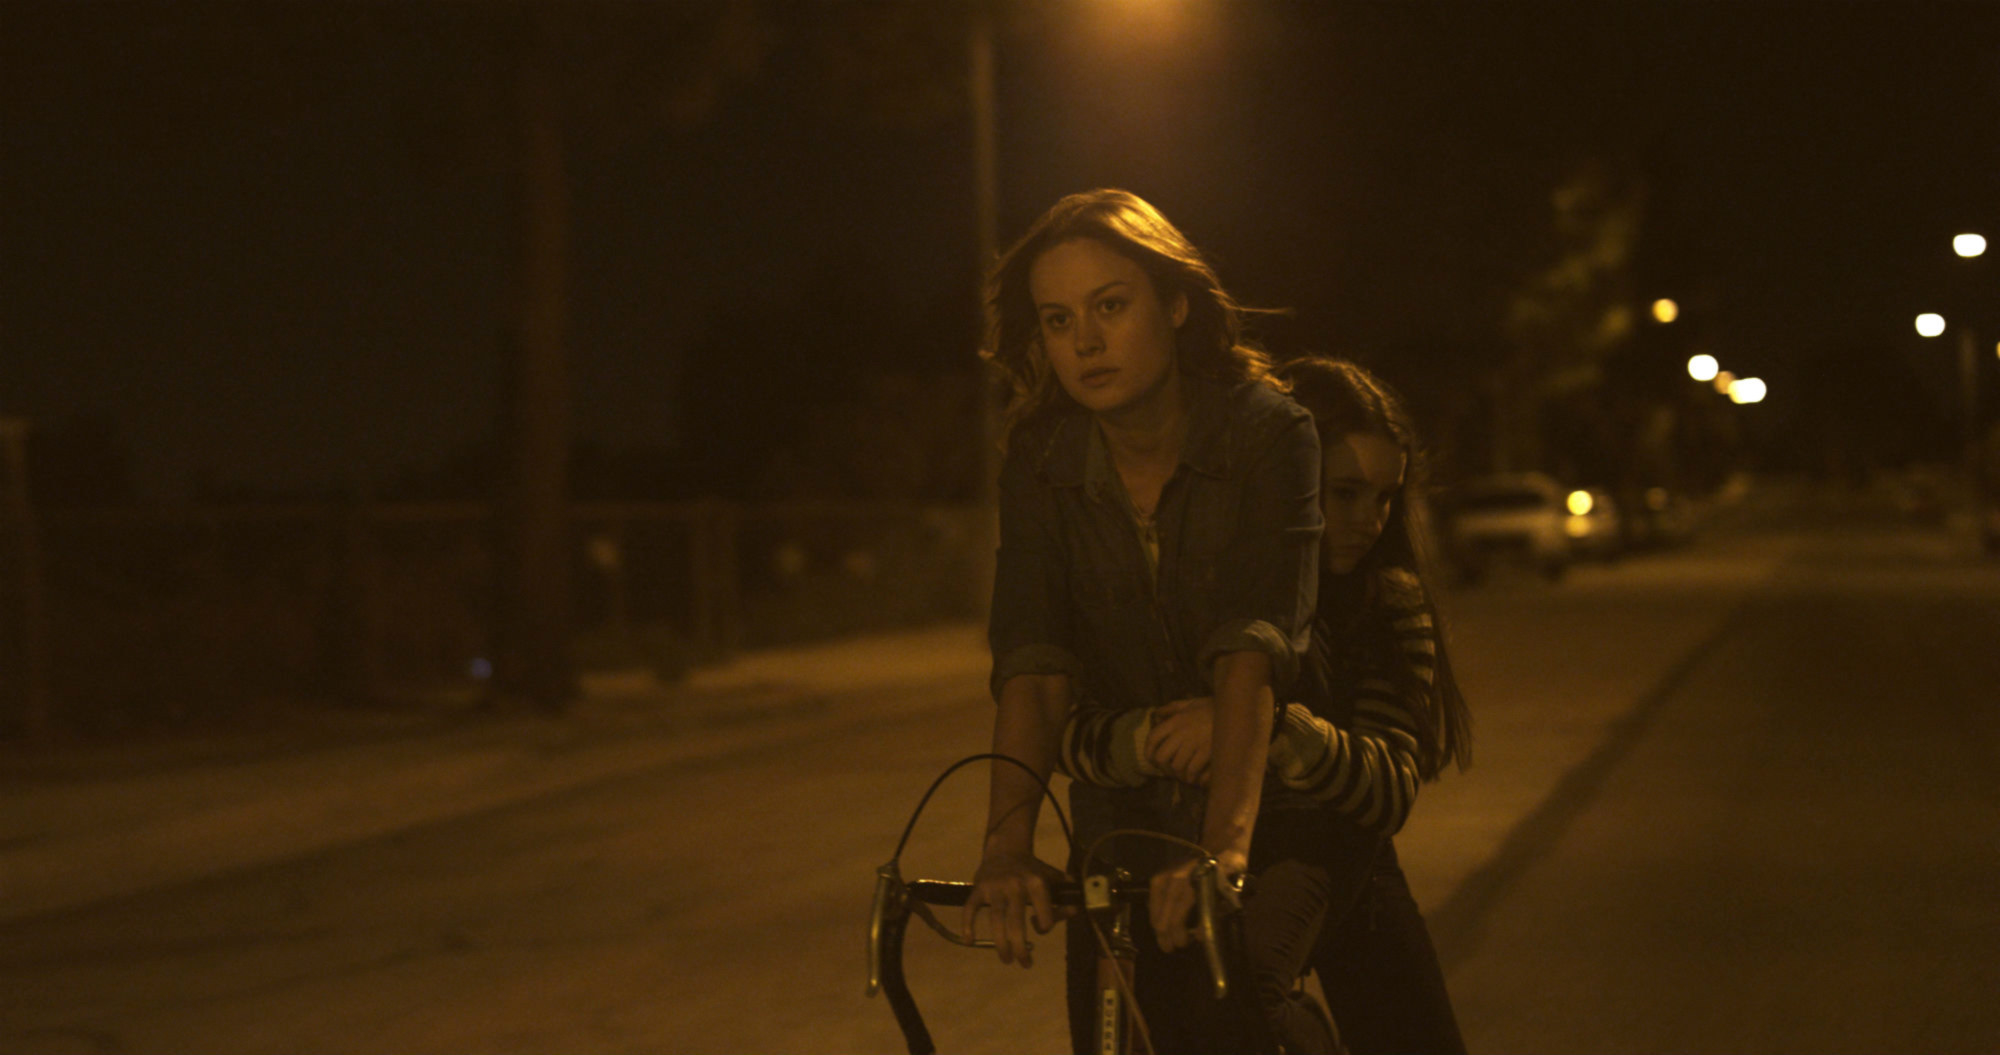 Brie Larson, Kaitlyn Dever riding a bike at night